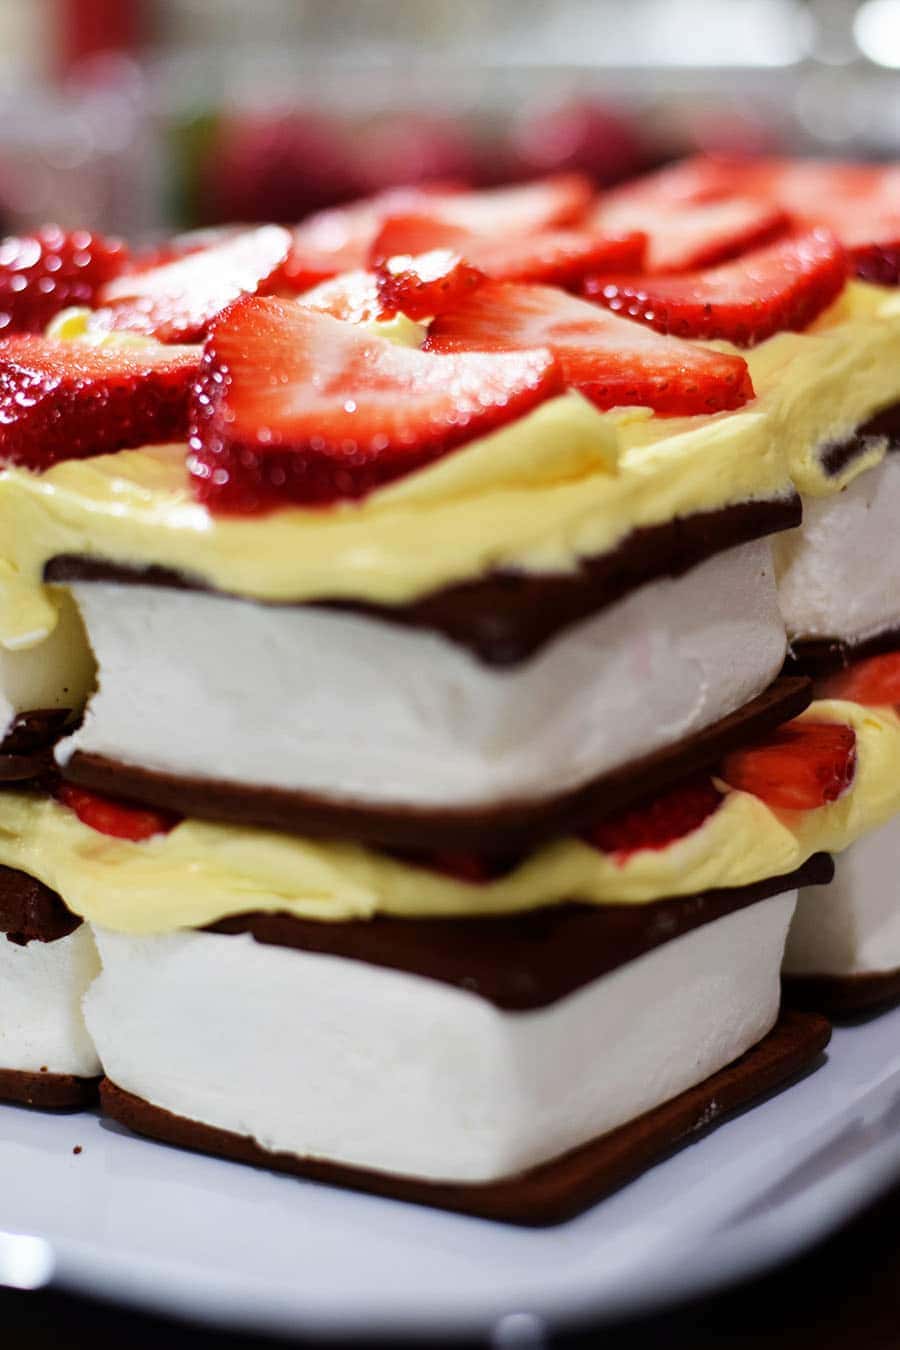 a side view of this strawberry ice cream cake layers with ice cream sandwiches, pudding, and sliced strawberries